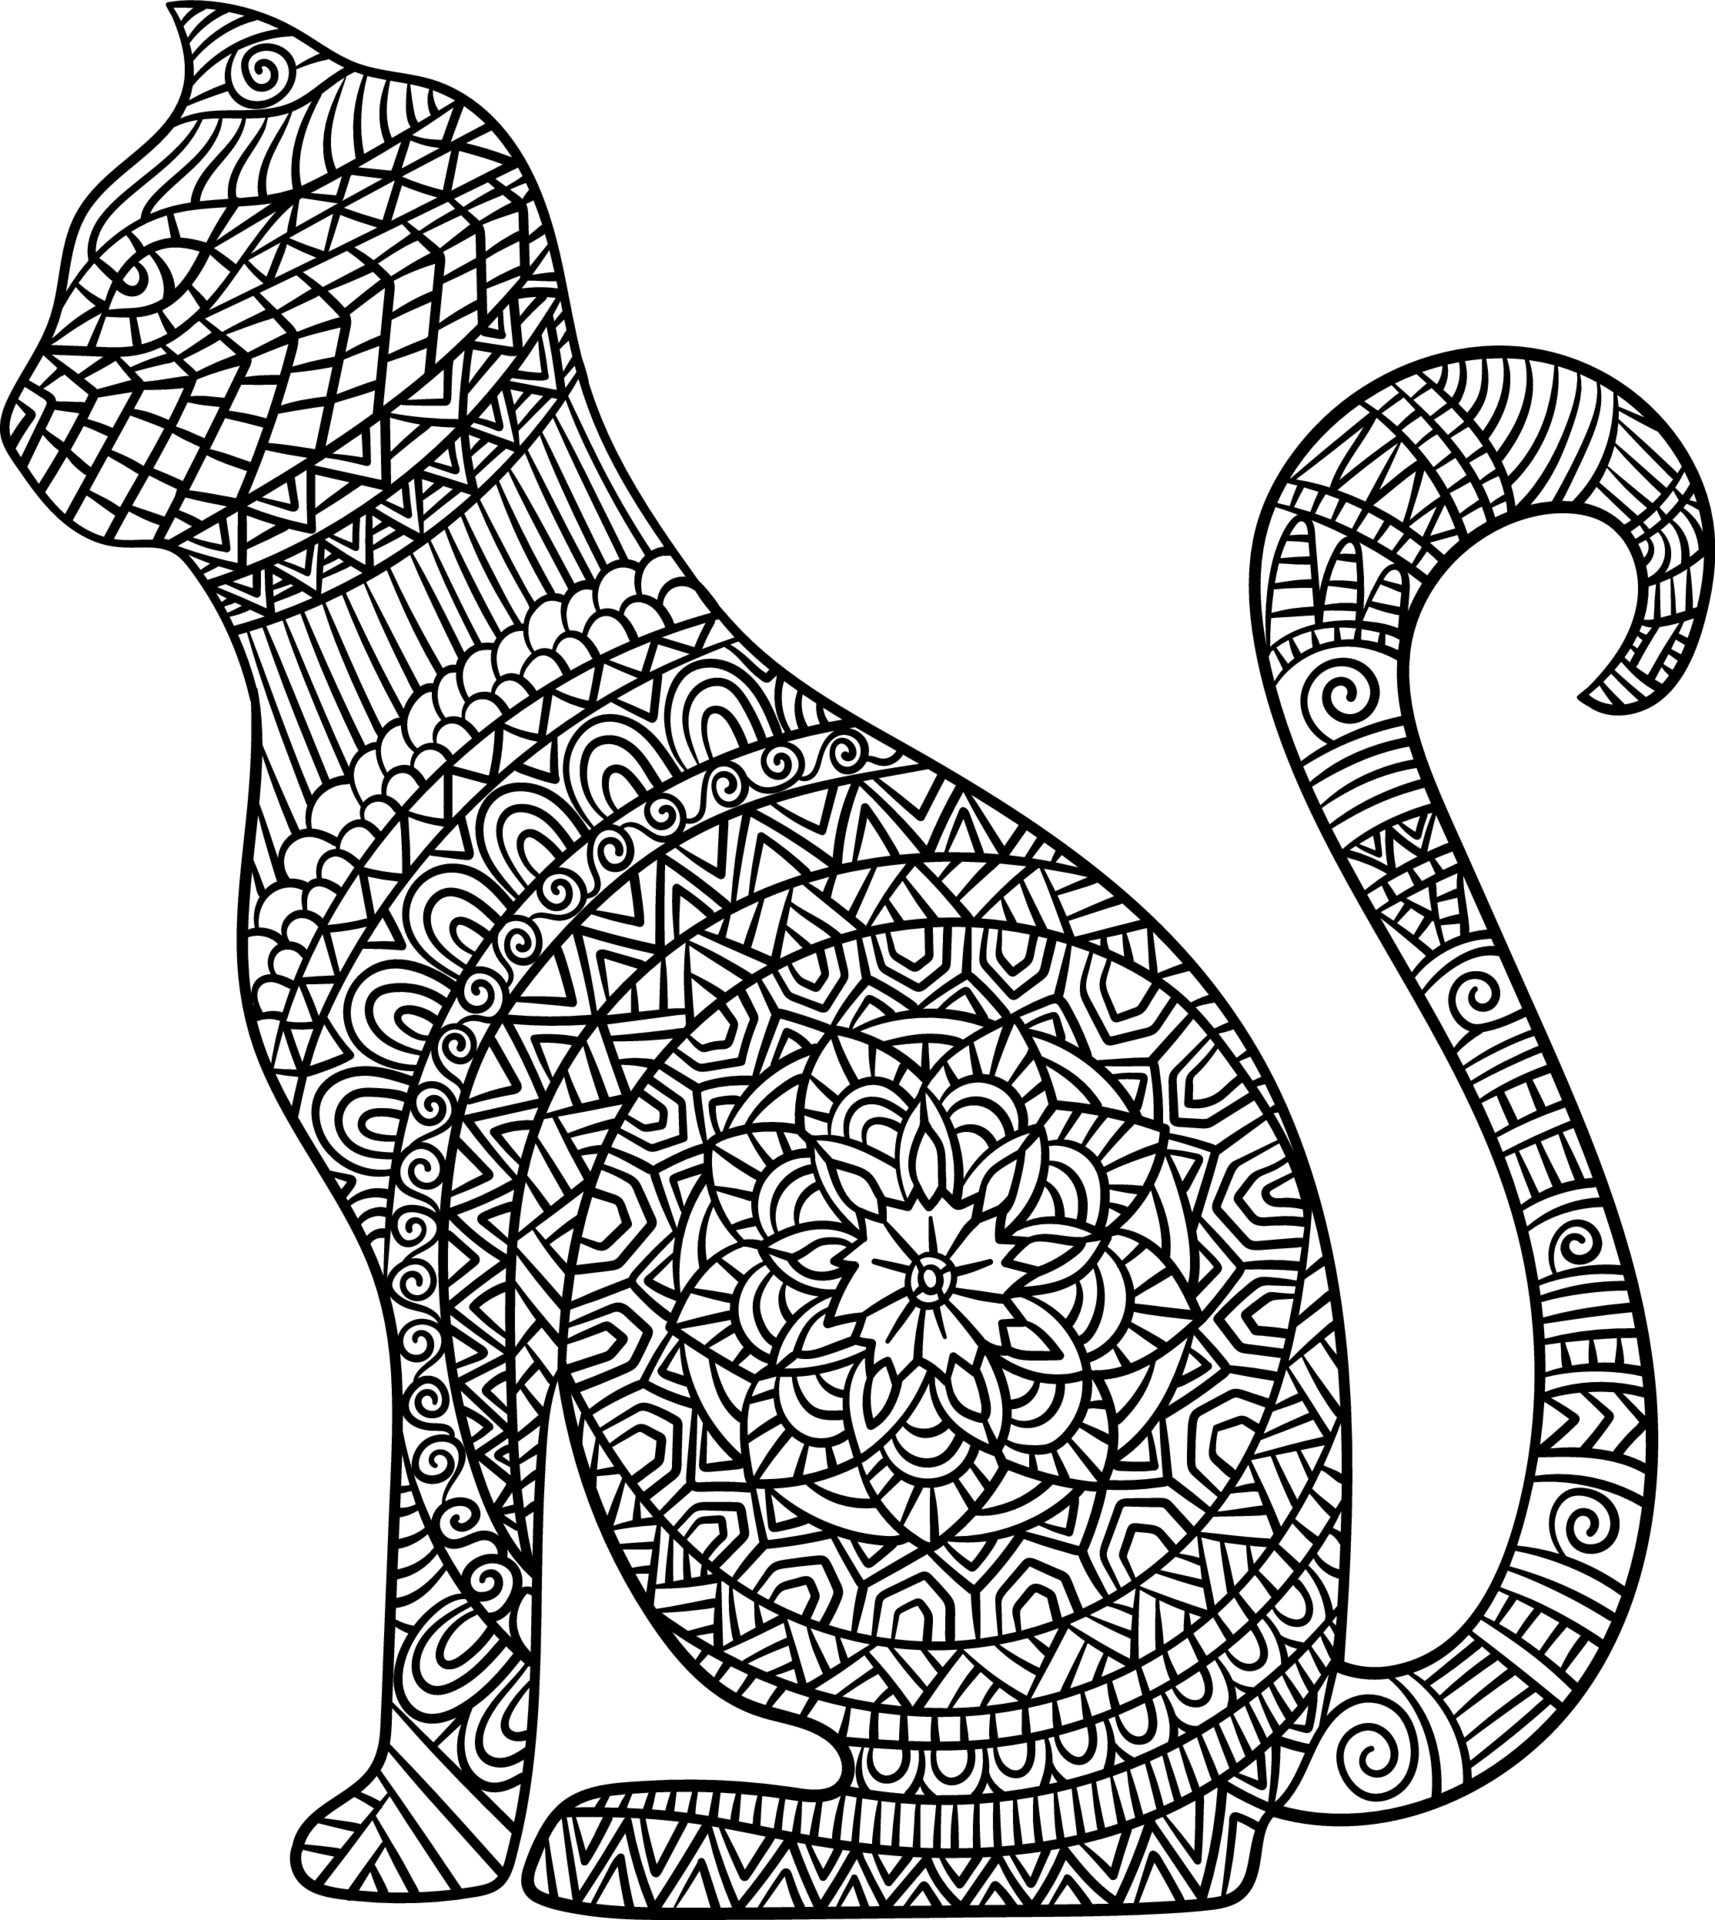 Cat Mandala Coloring Pages for Adults 20 Vector Art at Vecteezy